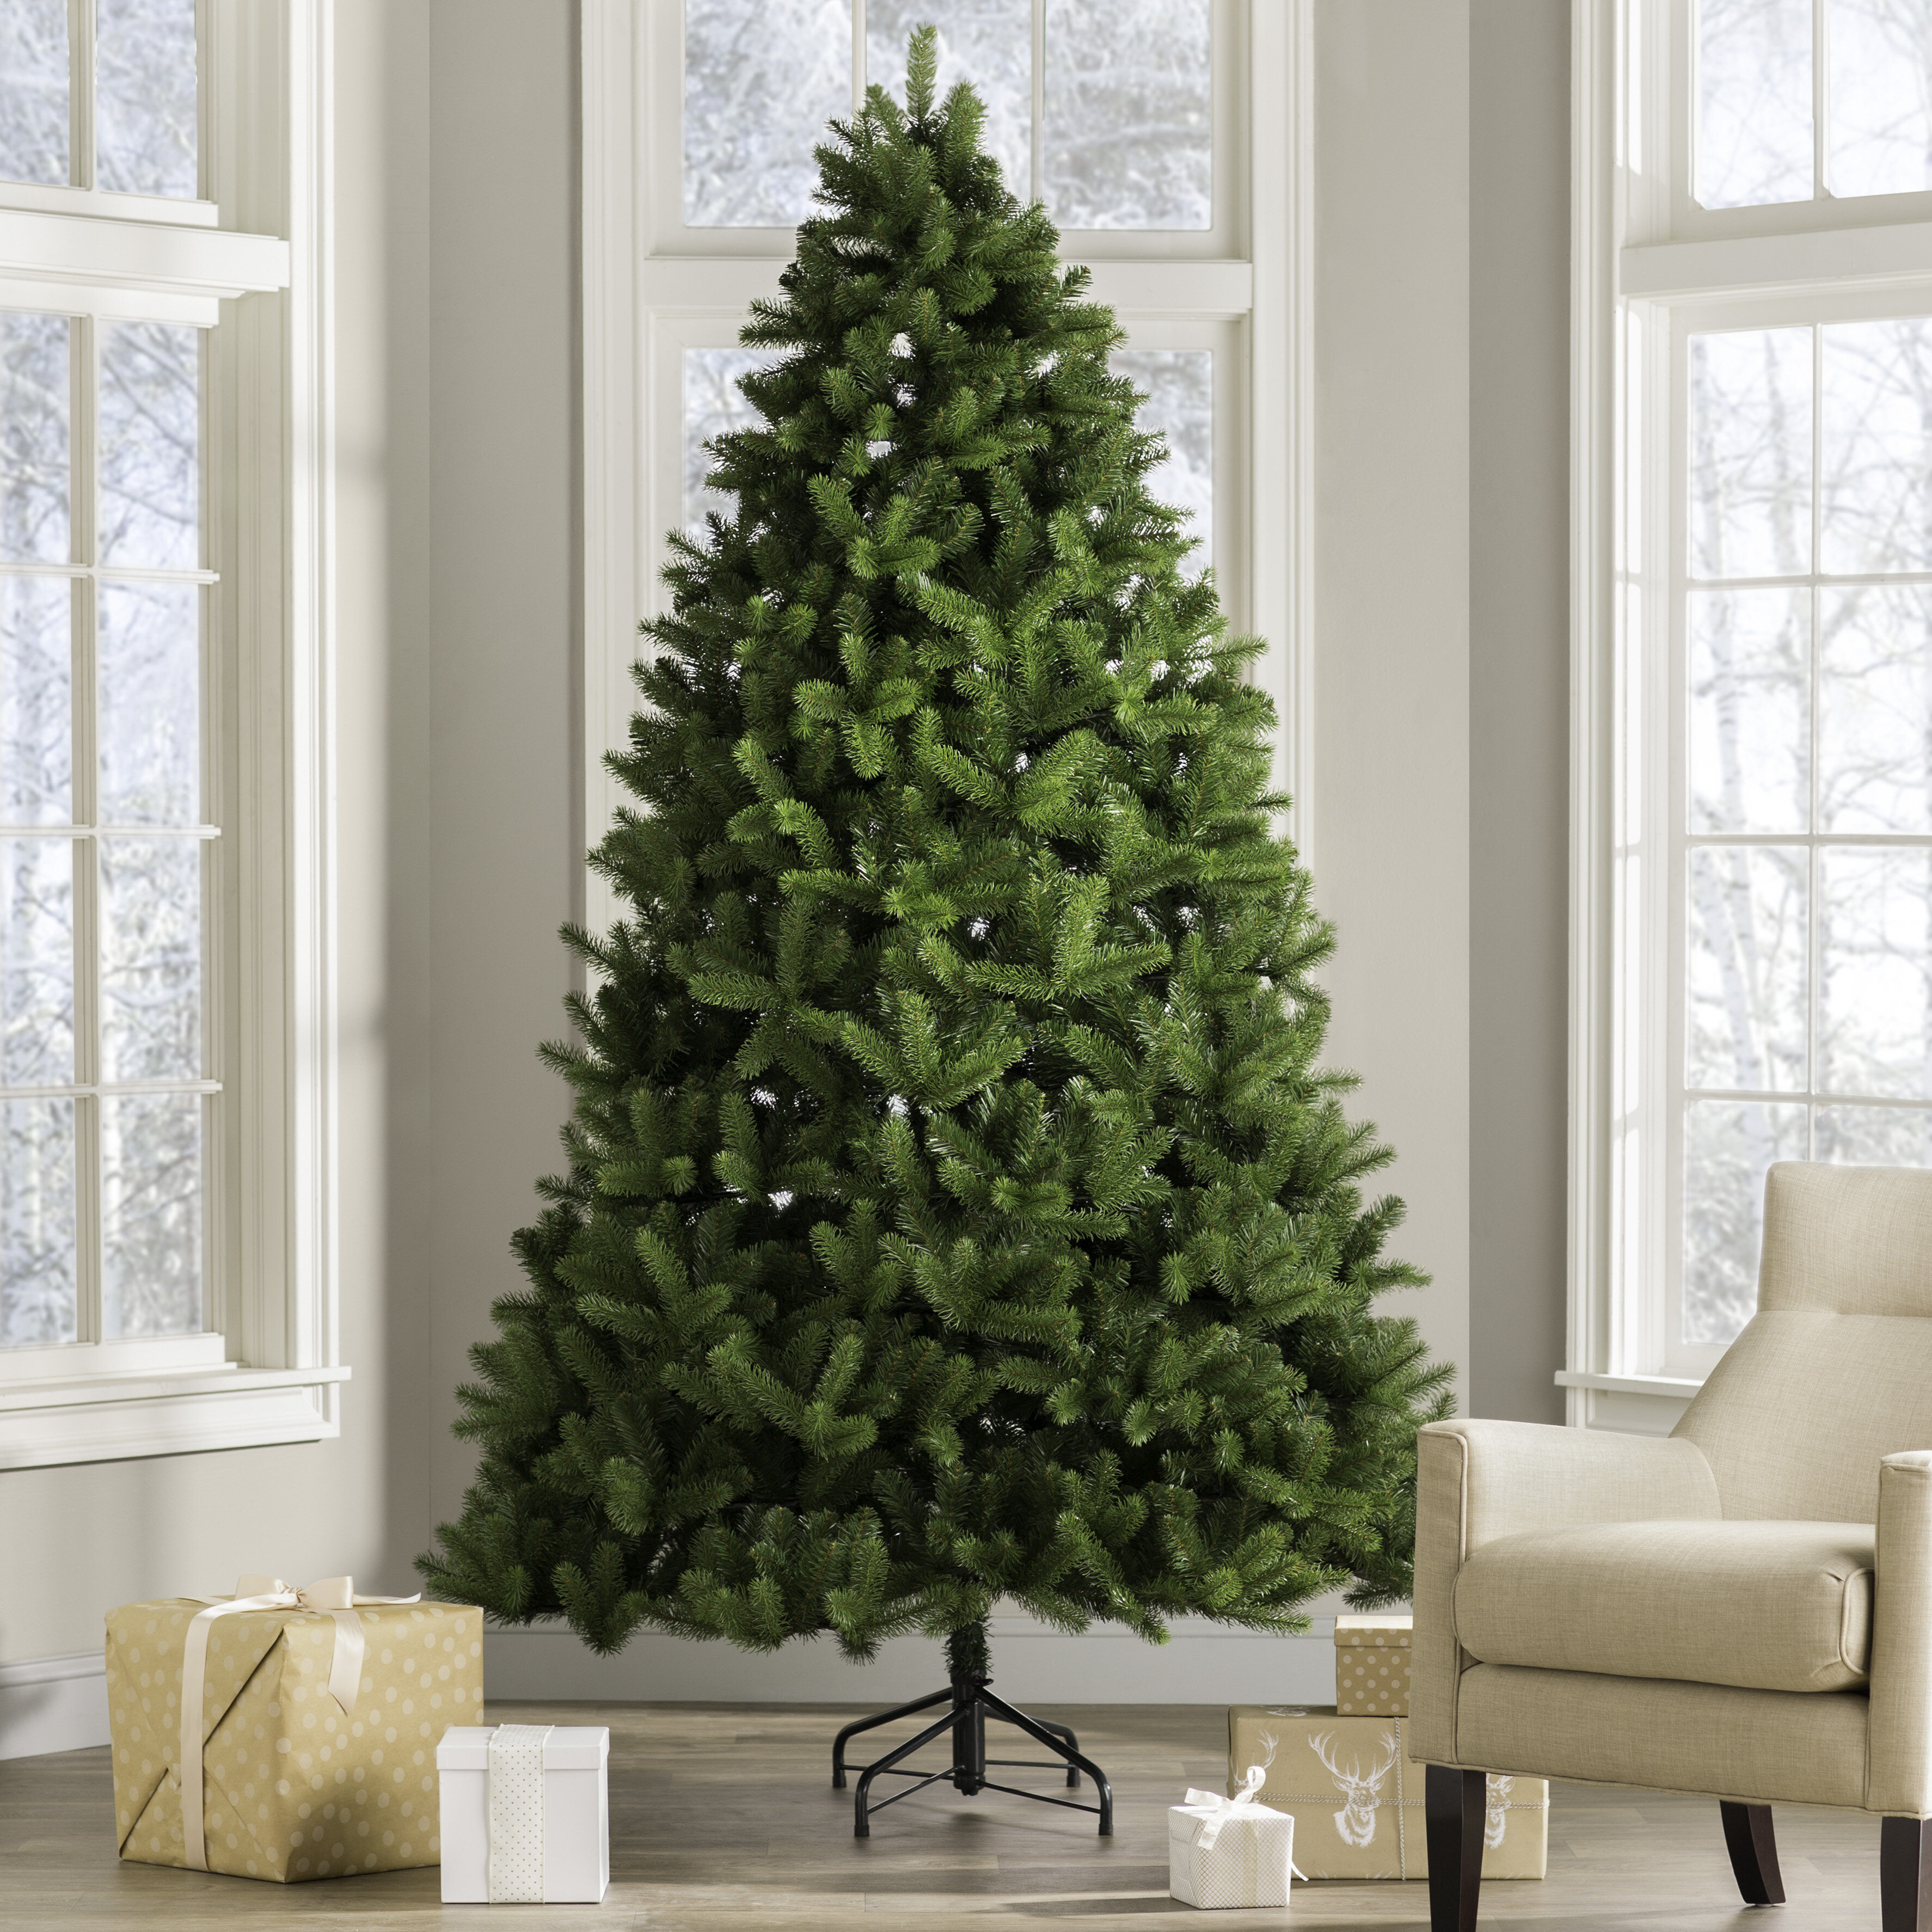 Newberry Spruce Artificial Christmas Tree Newberry Spruce Artificial Ch...